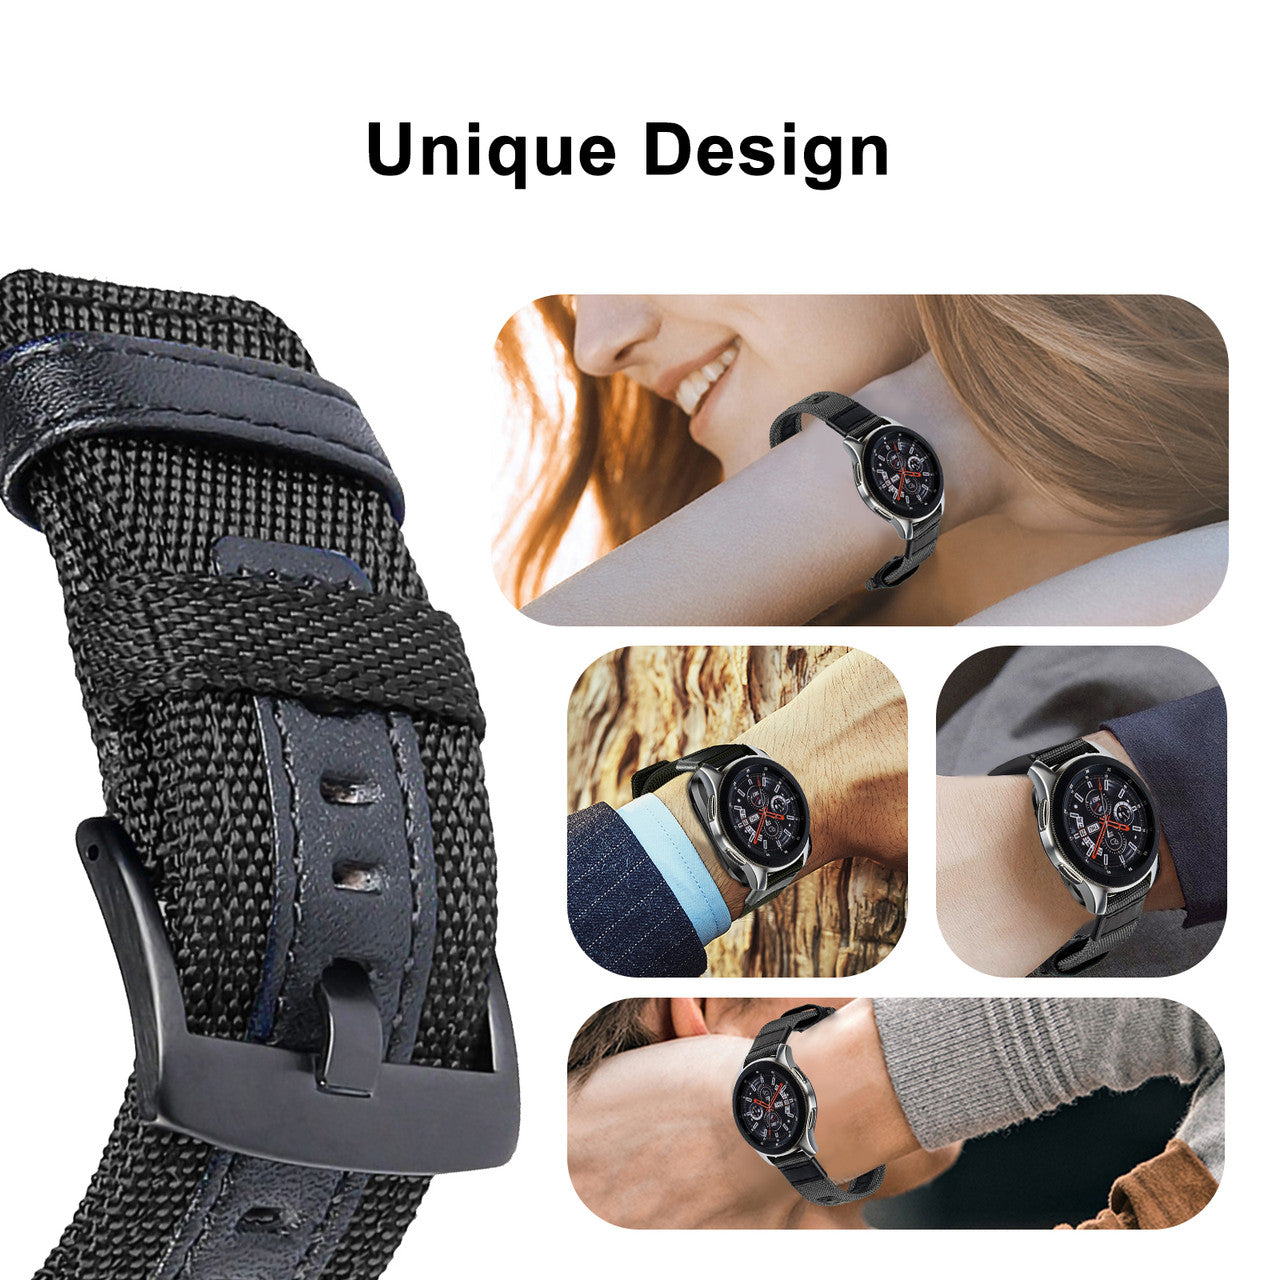 Compatible with Galaxy Watch 46mm Bands & Gear S3 Frontier Bands, 22mm Quick Release Nylon Sports Watch Band Strap Wristbands Bracelet fits for Gears S3 Classic / S3 Frontier Smart watch, Black